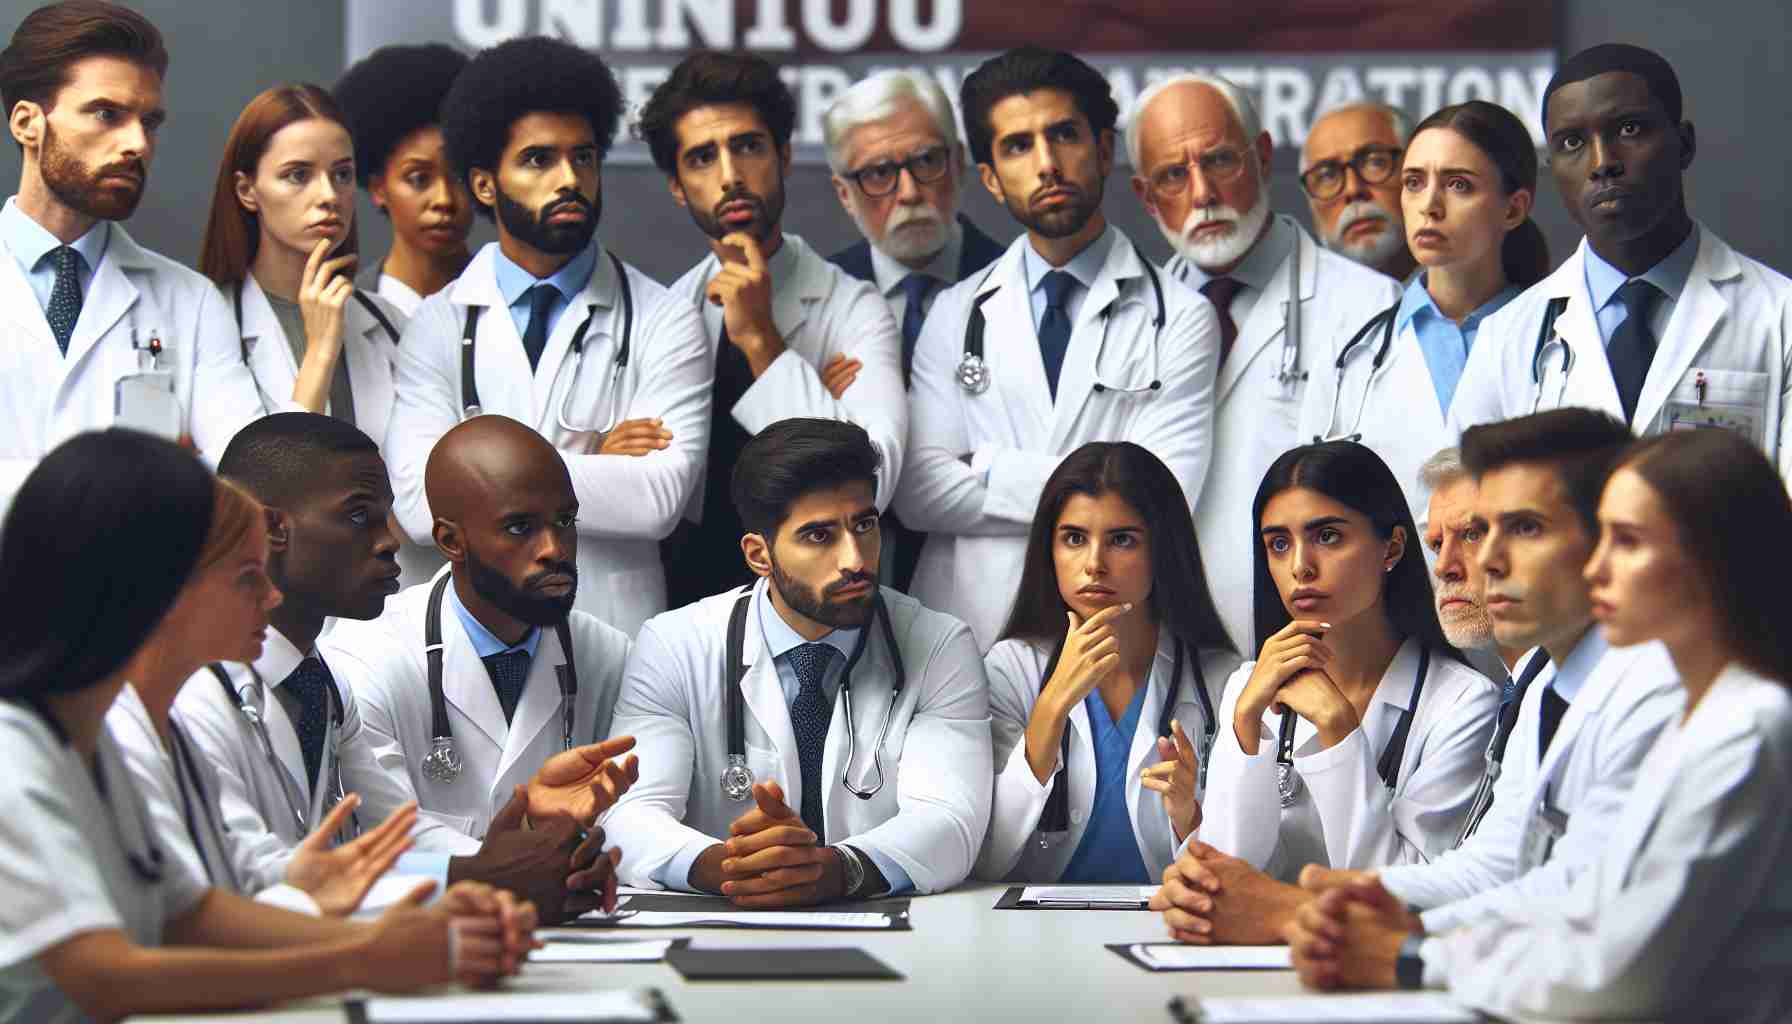 High-quality realistic image of a diverse group of doctors from various descents (Caucasian, Hispanic, Black, Middle-Eastern, South Asian) in their white lab coats and stethoscopes, gathered together for a meeting. They are earnestly engaged in a discussion over critical issues, with clear expressions of concern and determination. In the background, there's a large banner with the words 'Union Calls for Government Accountability' printed in bold, clearly visible font.